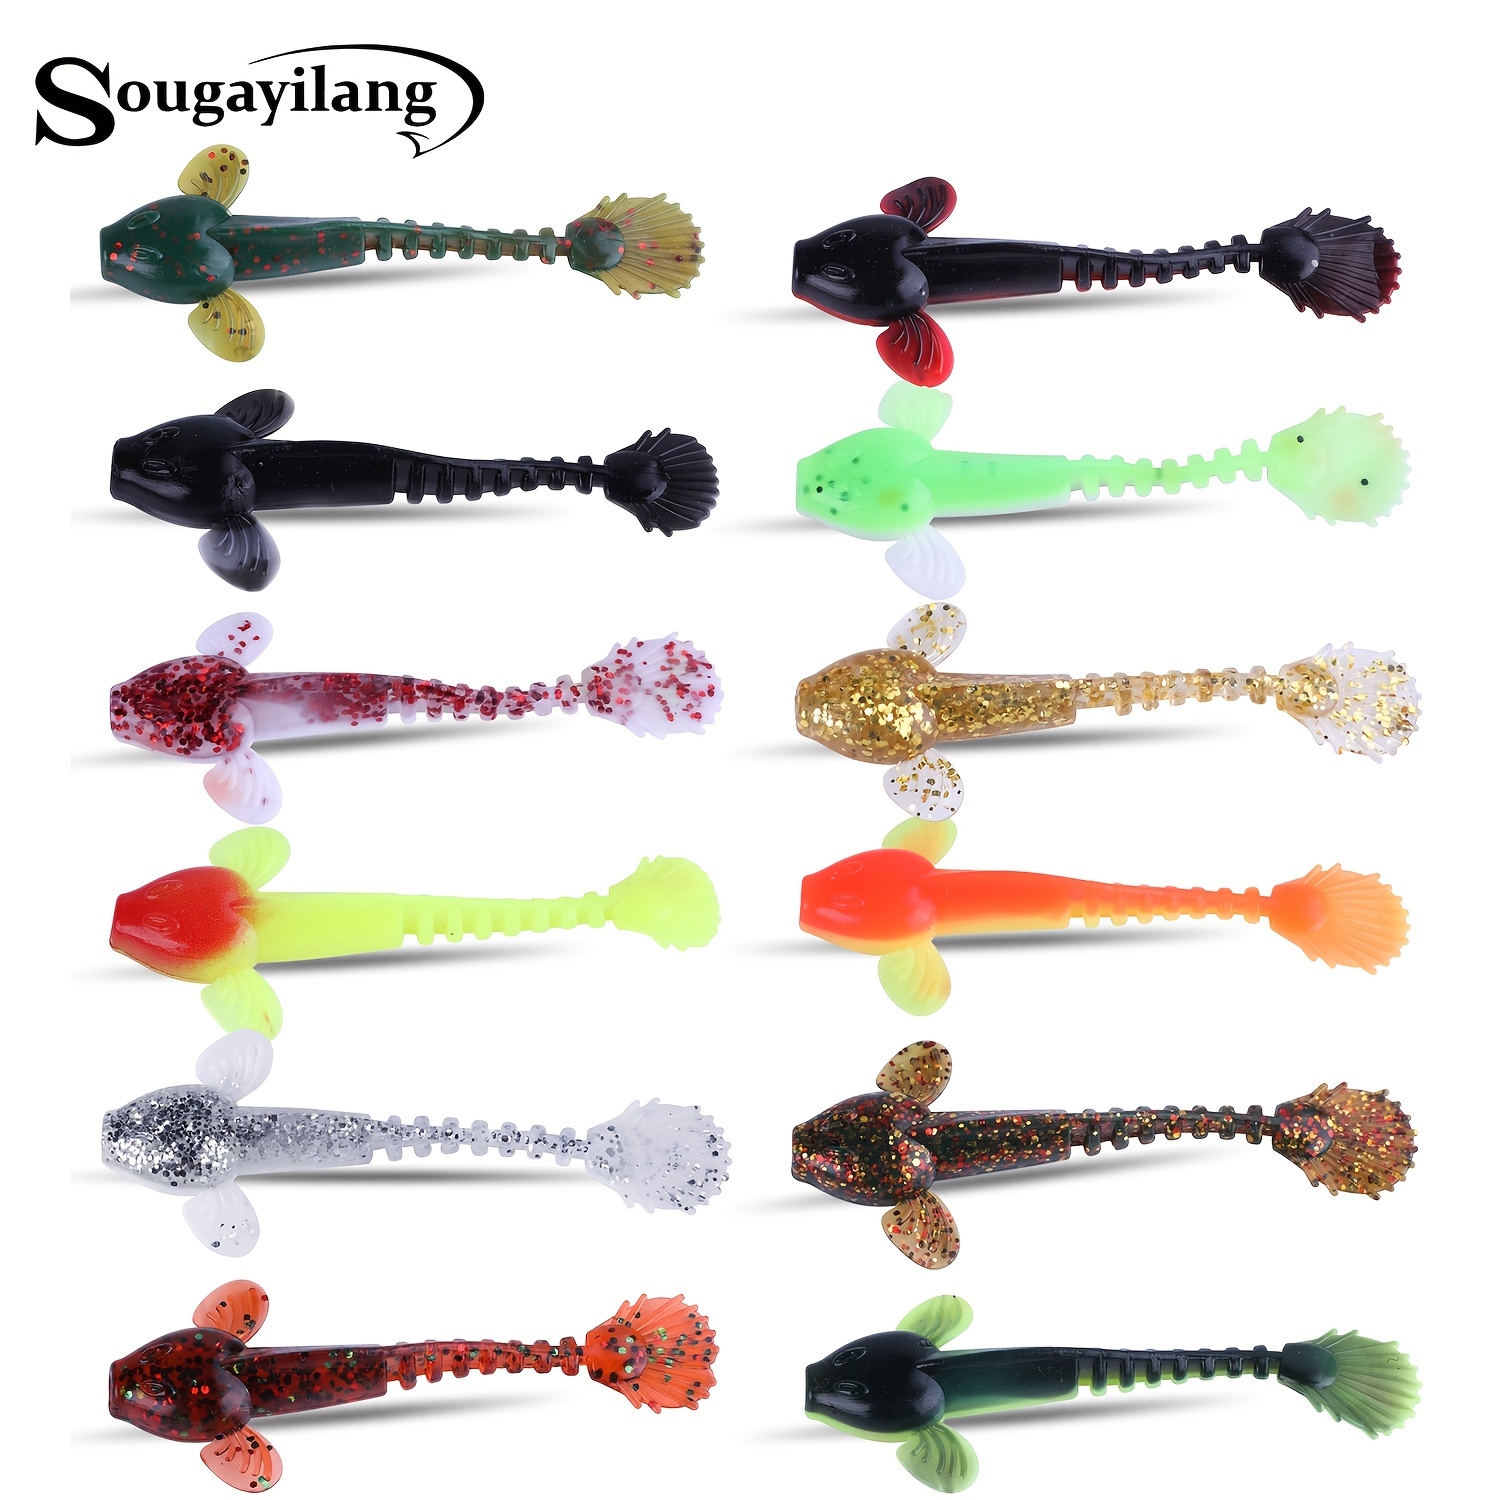 5pcs Soft Fishing Lure With Lead Head Hook, Artificial Bionic Soft Bait Lure,  Fishing Tackle For Saltwater Freshwater